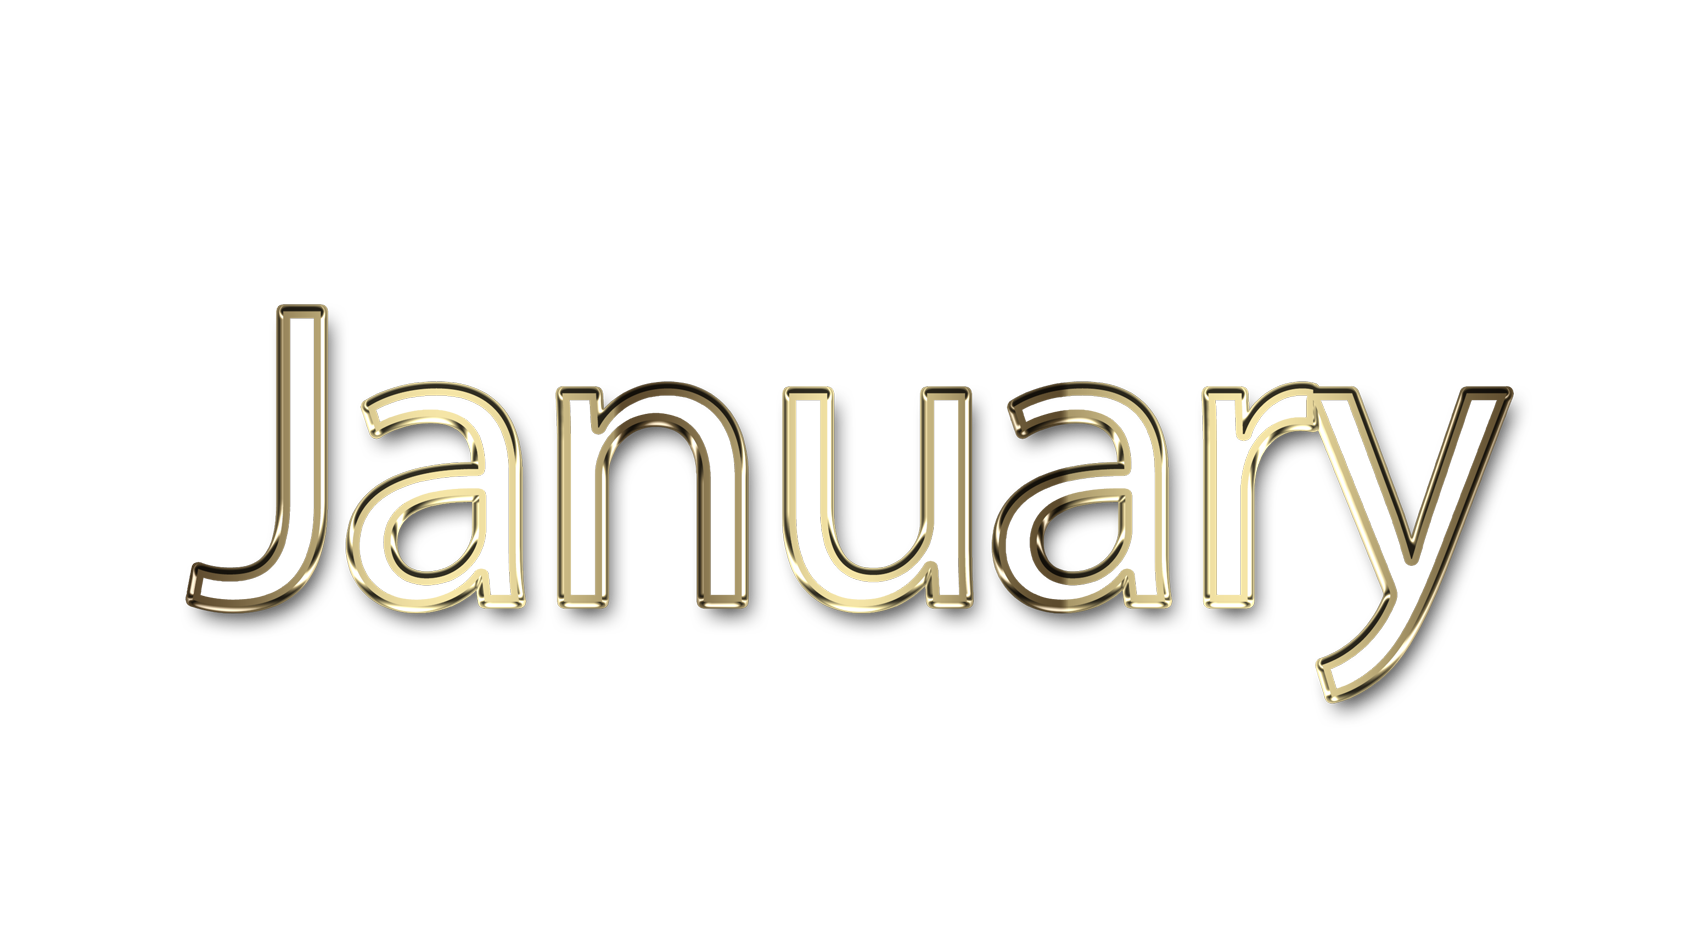 January png, word January png, January word png, January text png, January letters png, January word art typography PNG images, transparent png